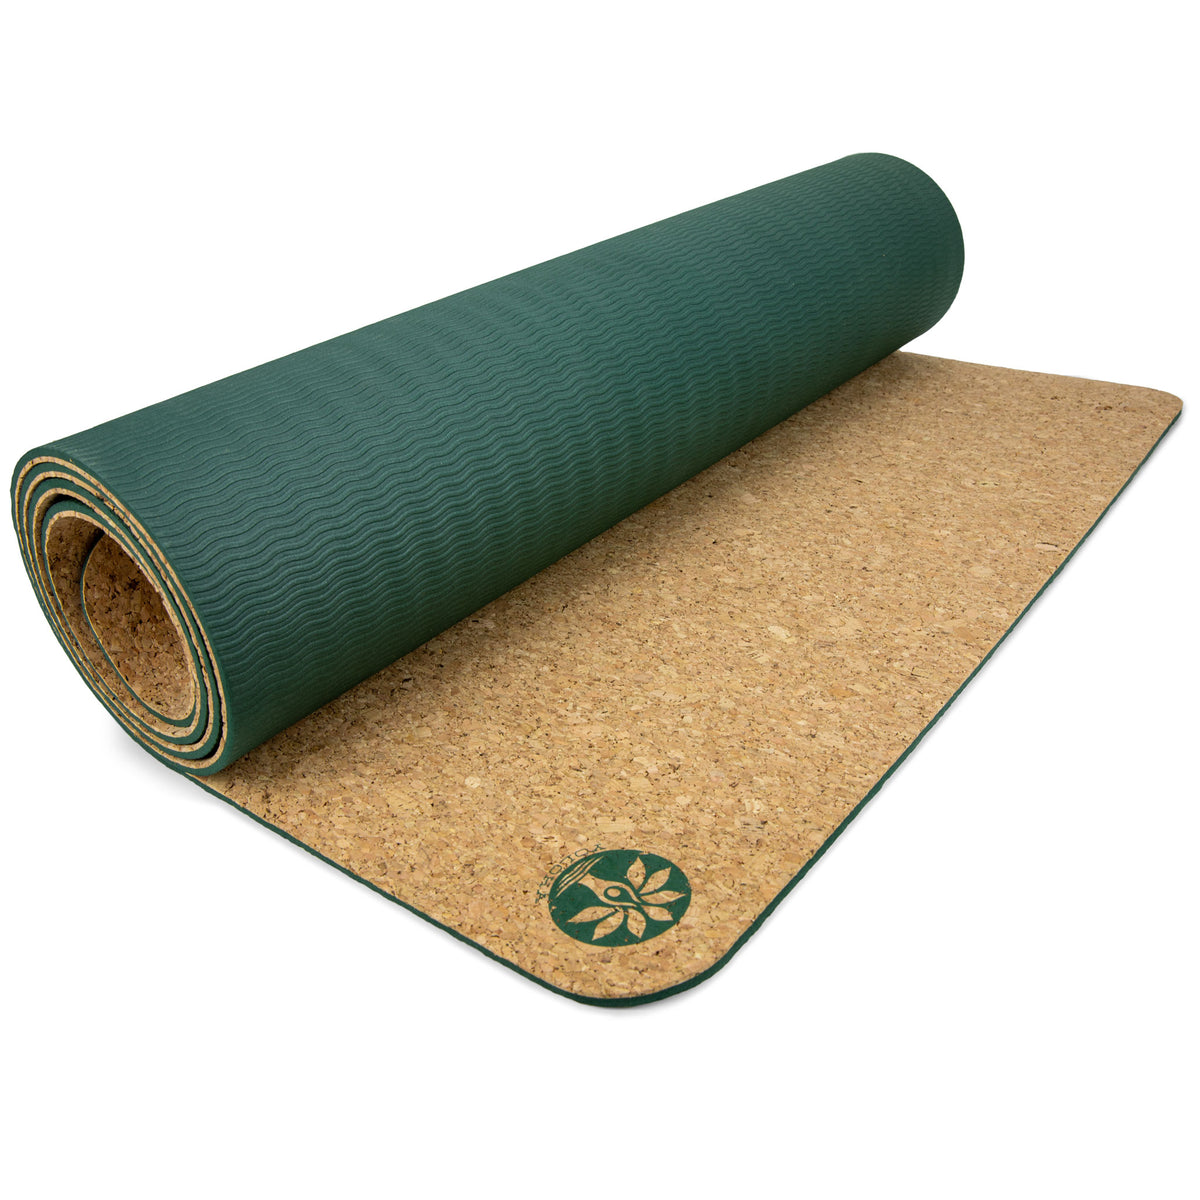 Wholesale foam padding under carpet For All Your Customers